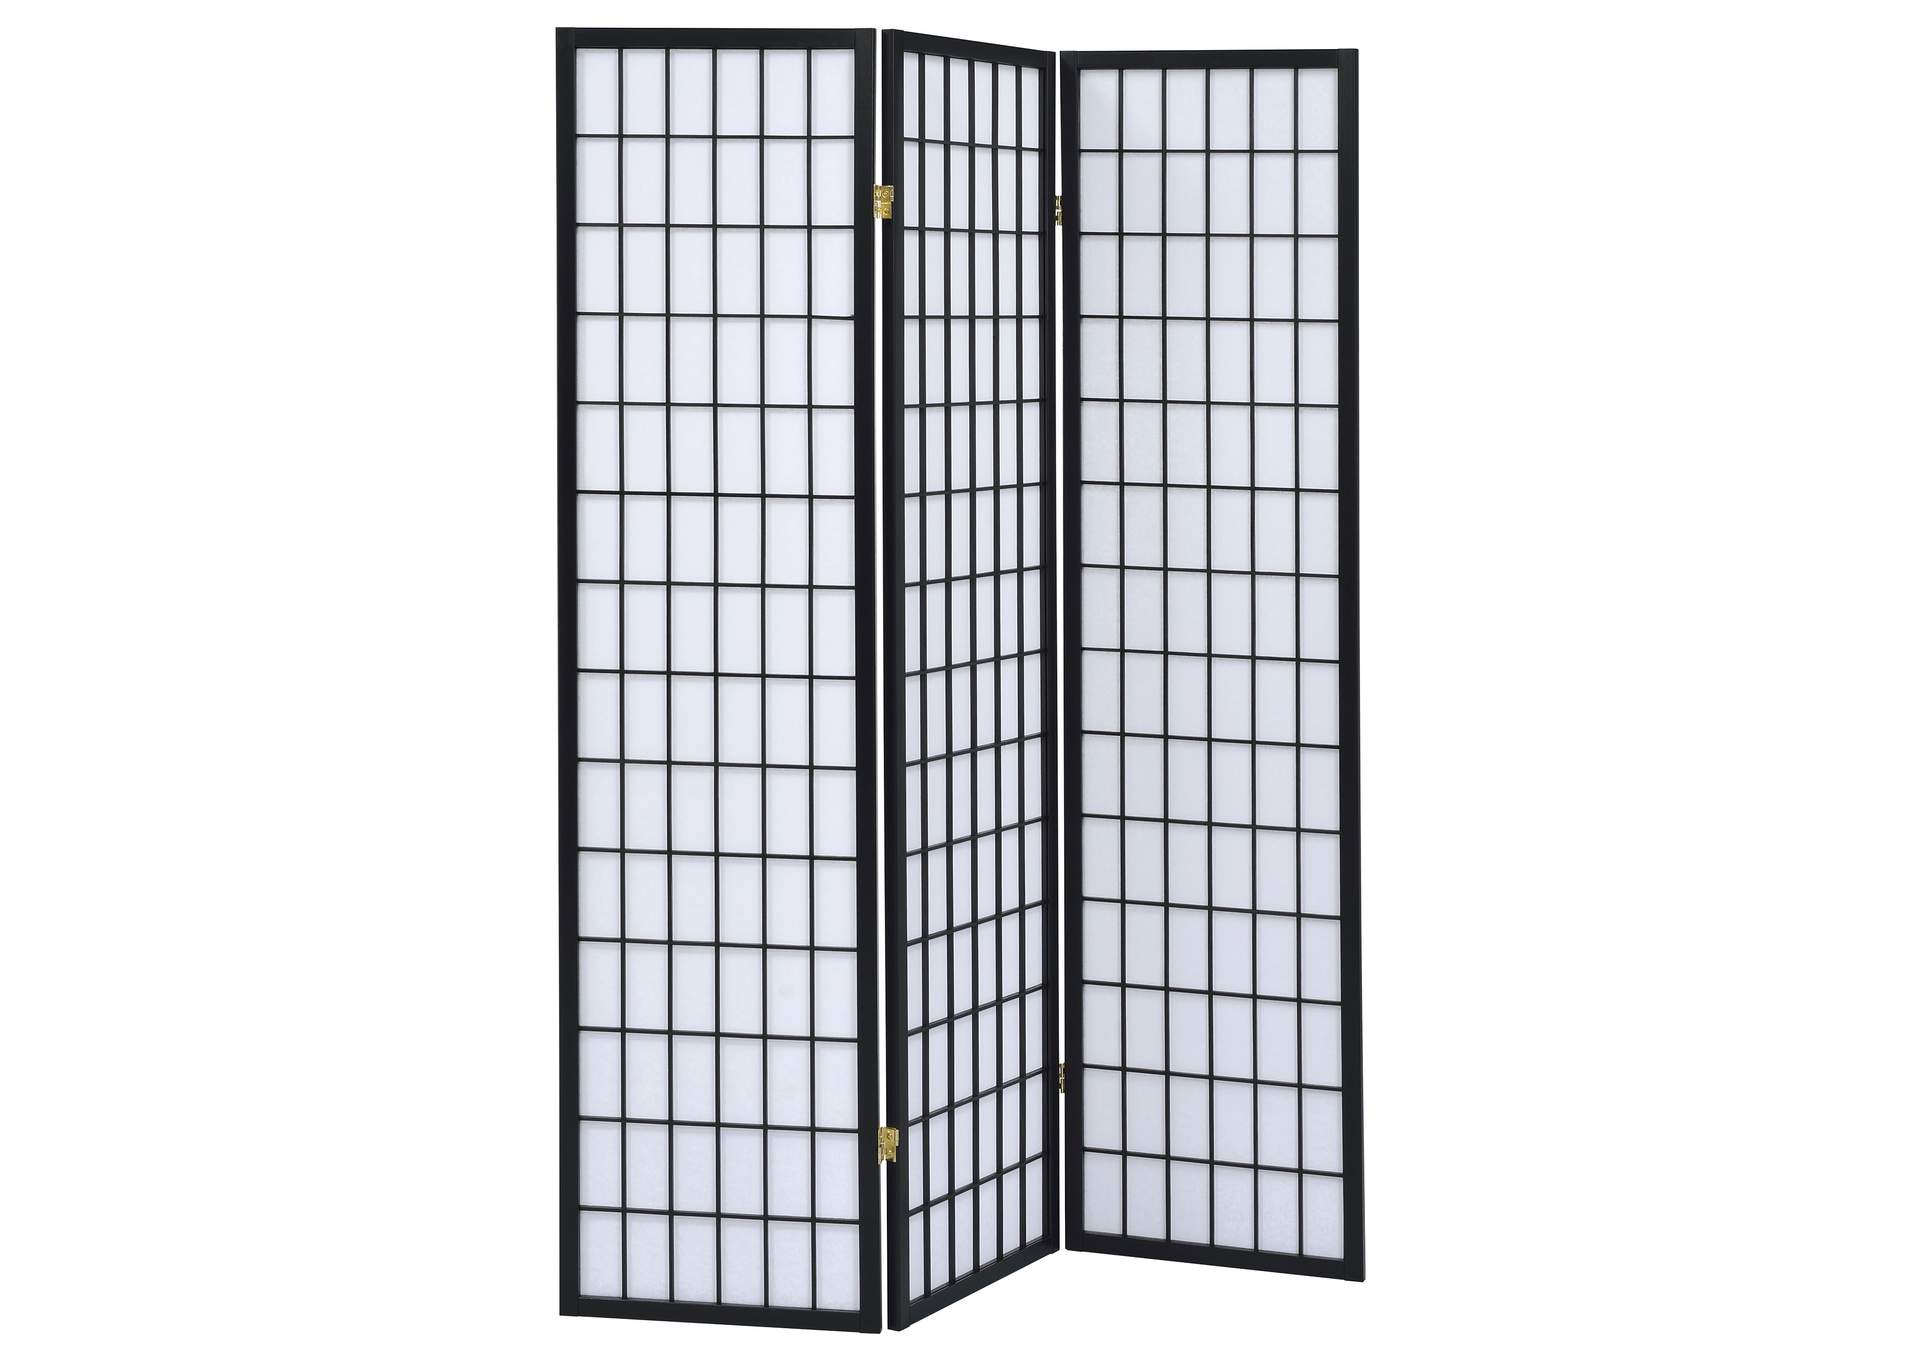 Carrie 3-panel Folding Screen Black and White,Coaster Furniture